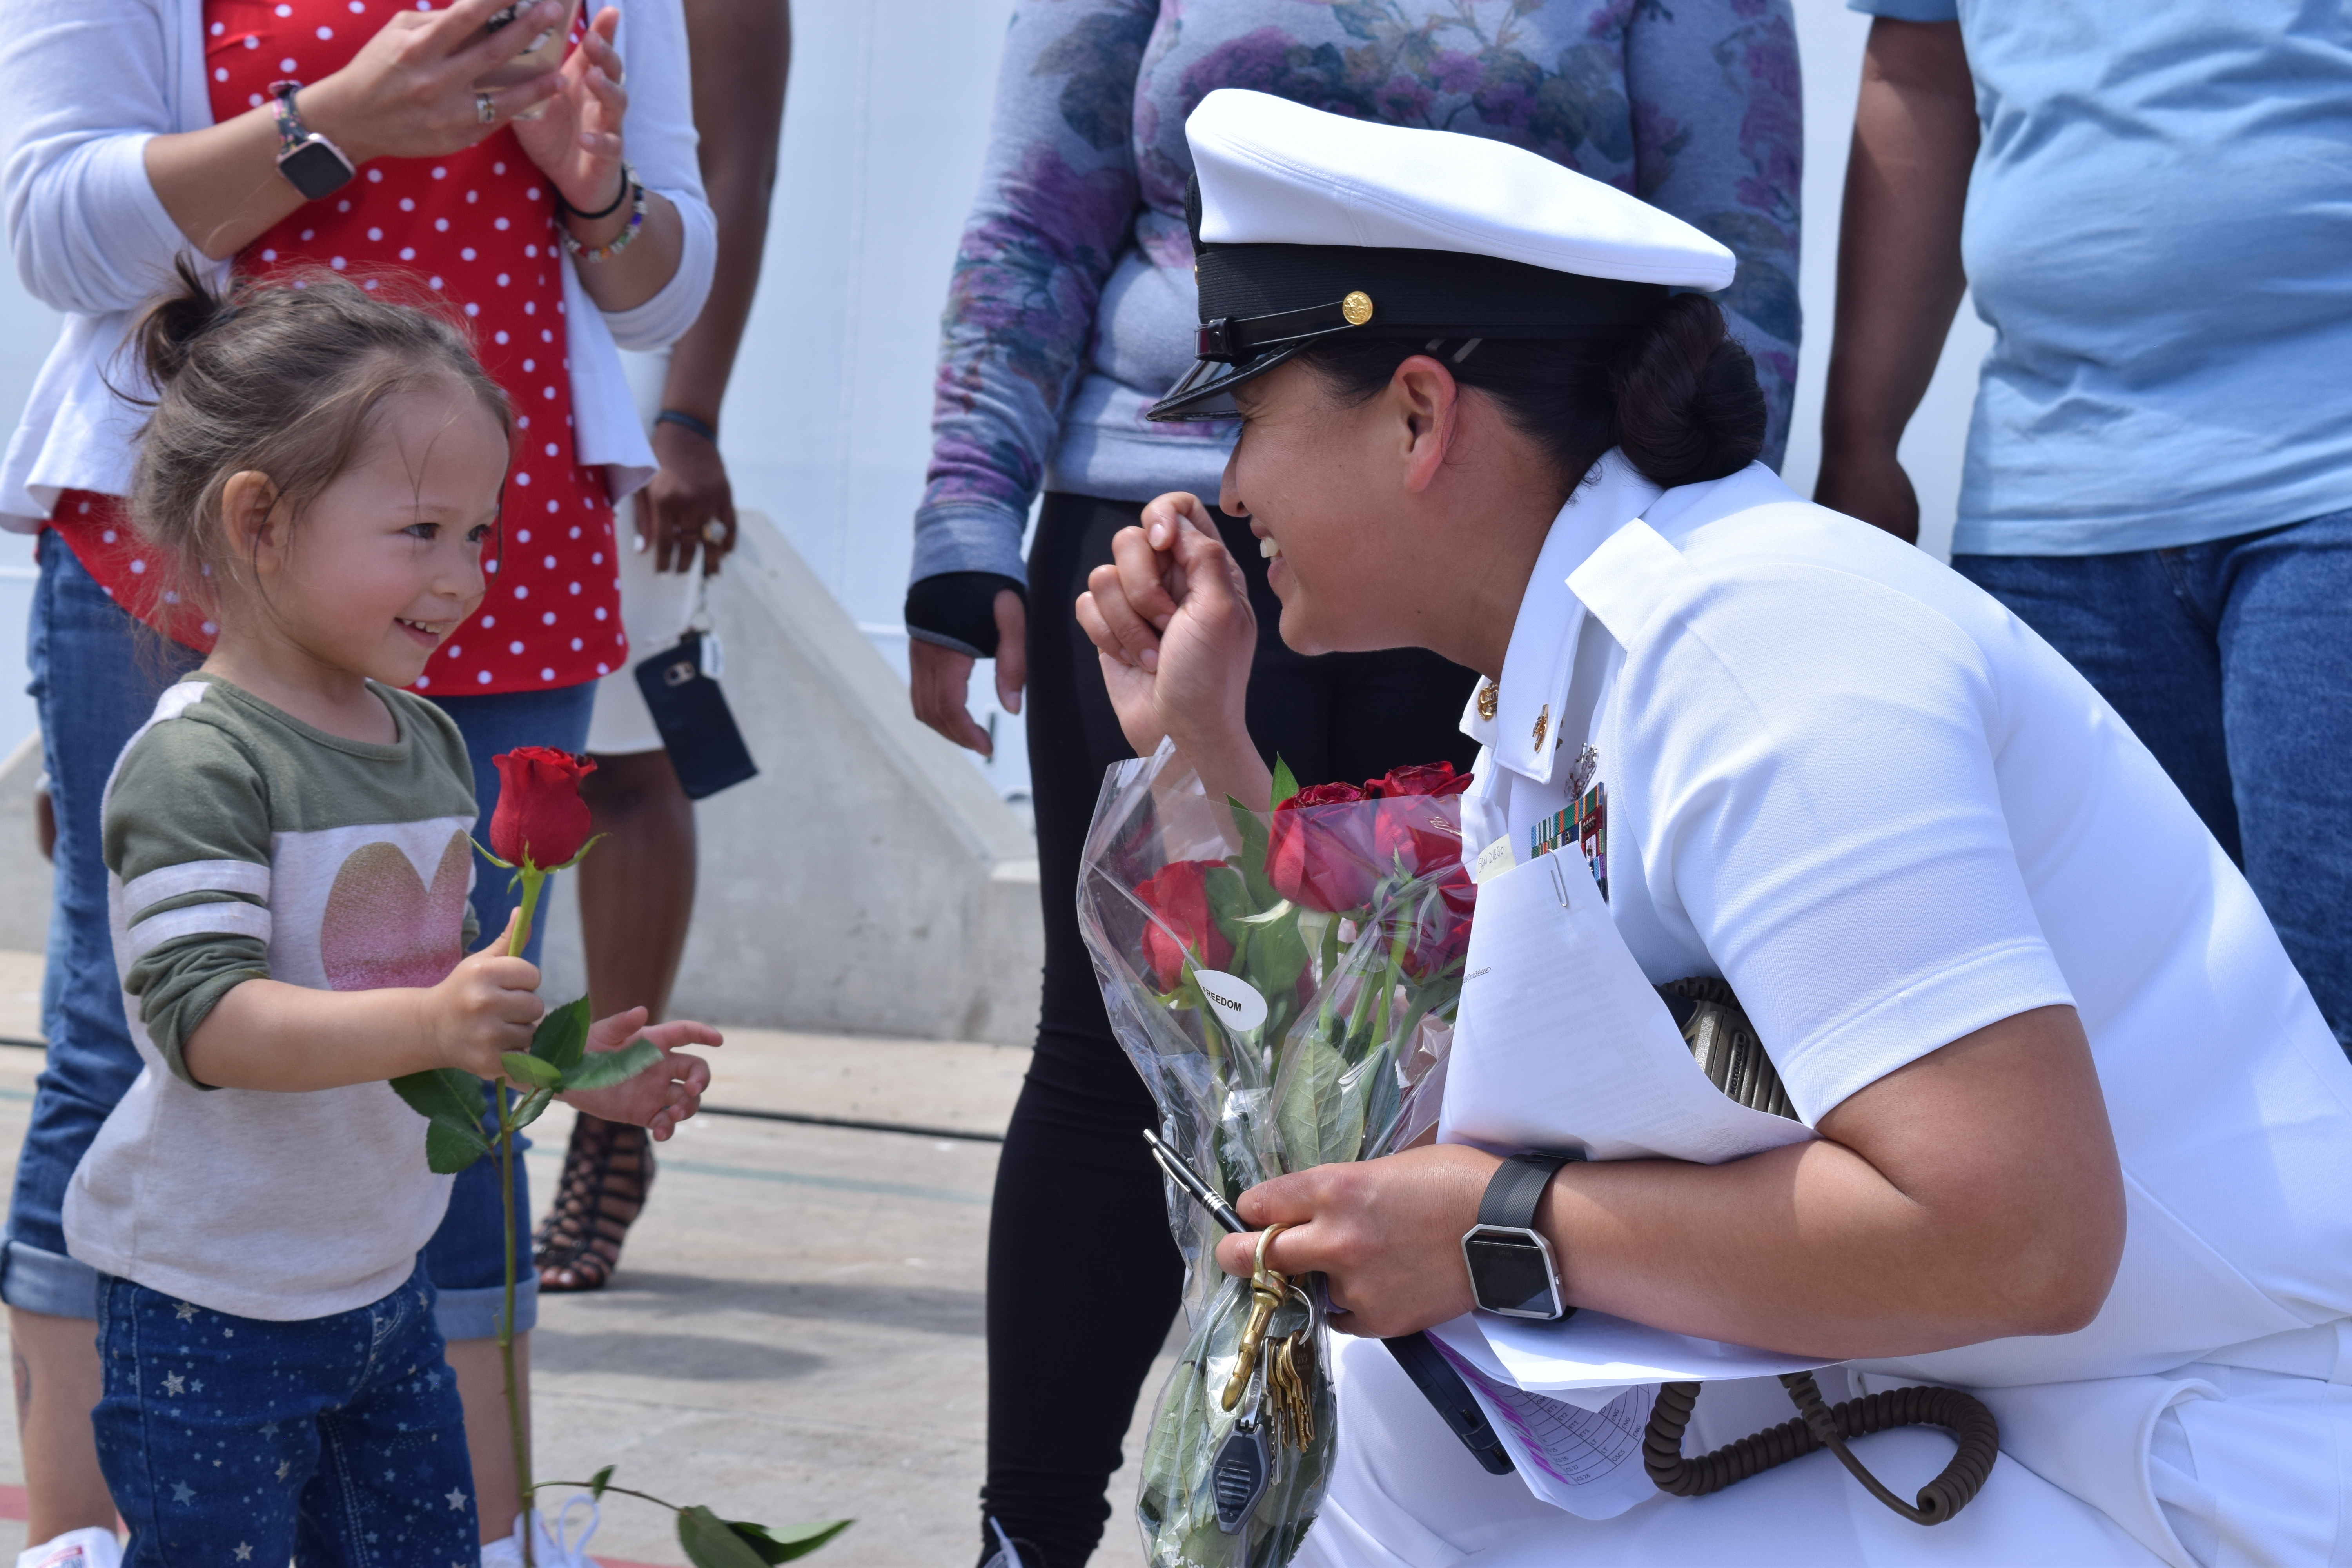 Chief Logistics Specialist Lillian Morales, assigned to USS Charleston, is greeted by her family during a homecoming at Naval Base San Diego. Charleston arrived to homeport in San Diego after successfully completing the ship's maiden voyage from the Austal USA shipyard in Mobile, Alabama. Charleston is the 11th ship in the littoral combat ship Independence-variant class. (U.S. Navy photo by Lt. j.g. Jasmine Spencer)